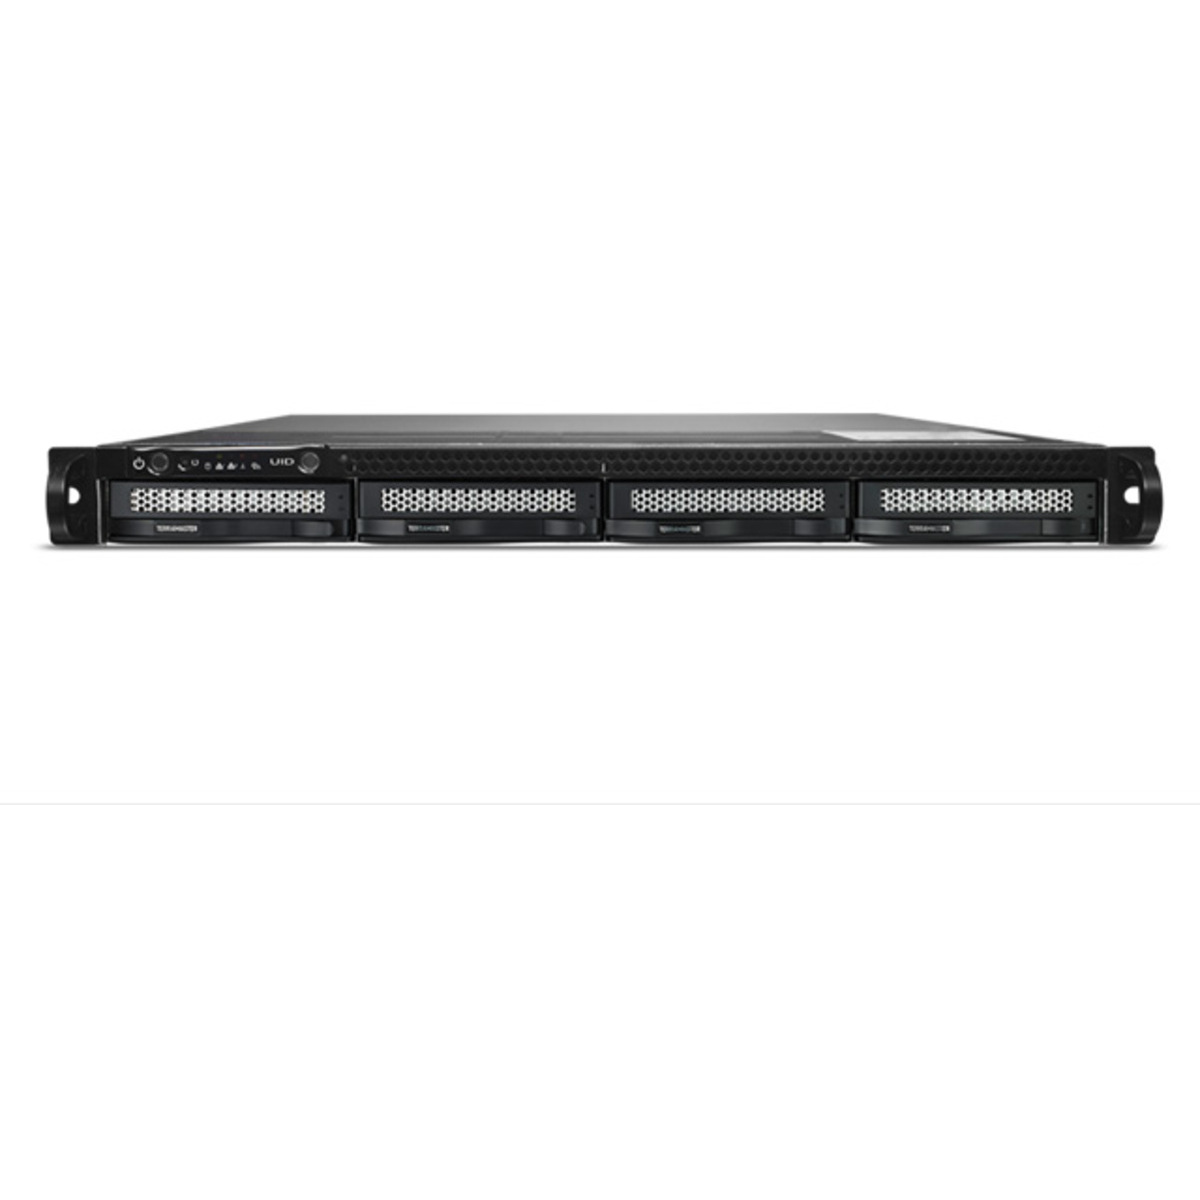 TerraMaster U4-111 72tb 4-Bay RackMount Multimedia / Power User / Business NAS - Network Attached Storage Device 4x18tb Seagate EXOS X18 ST18000NM000J 3.5 7200rpm SATA 6Gb/s HDD ENTERPRISE Class Drives Installed - Burn-In Tested U4-111